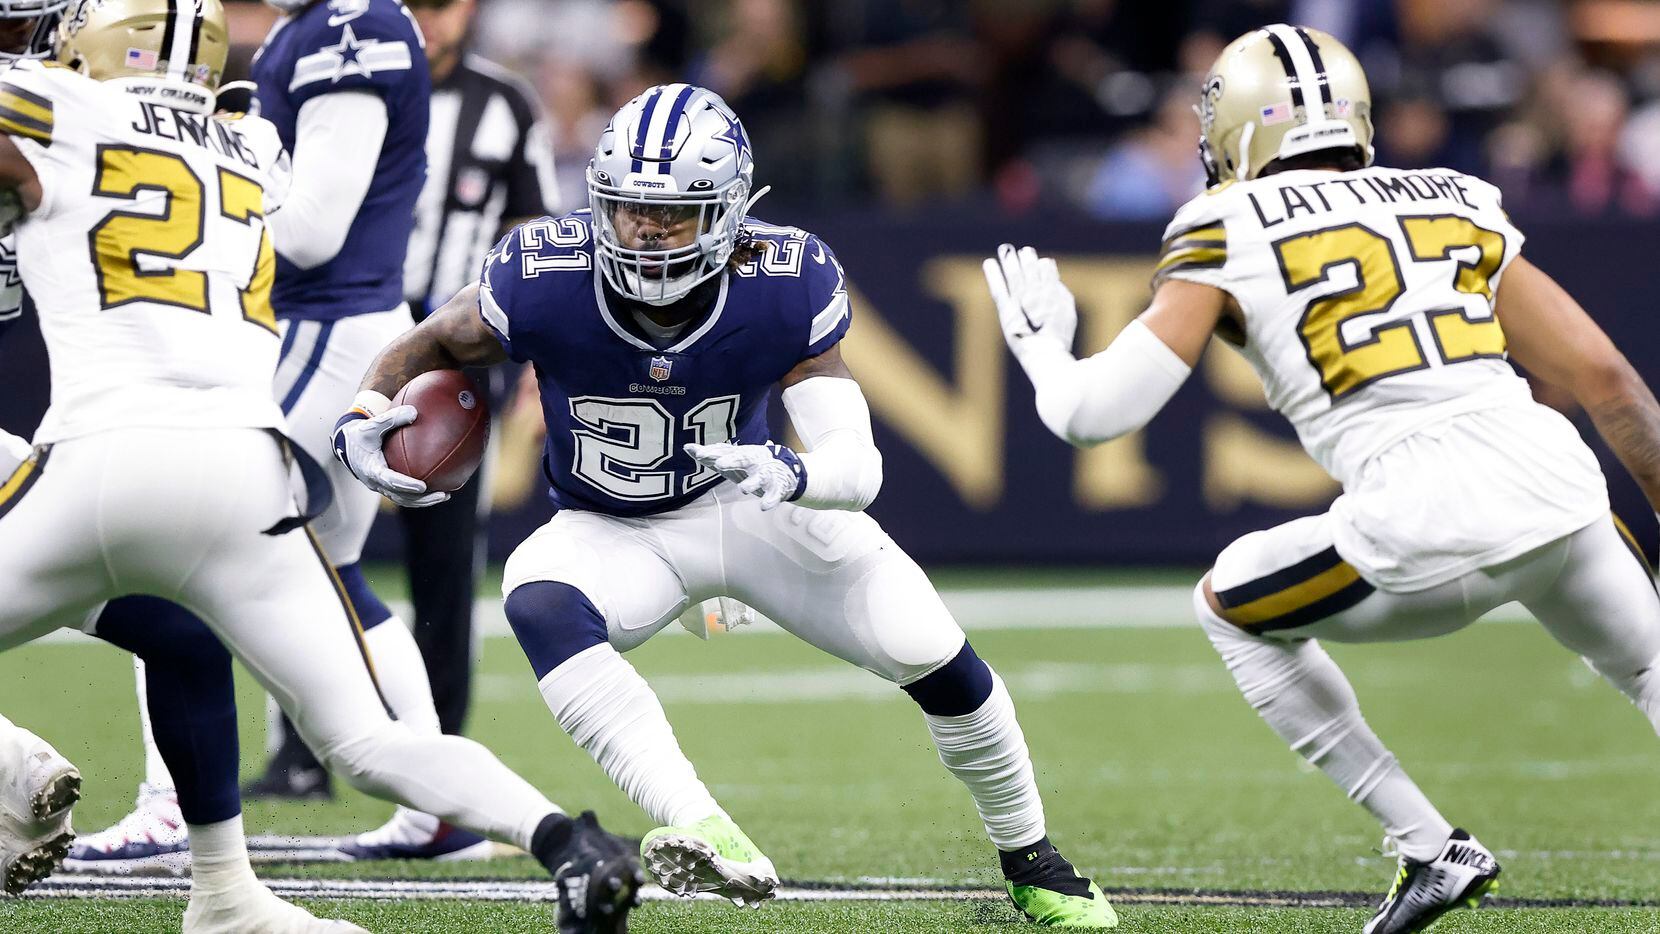 Dallas Cowboys running back Ezekiel Elliott (21) carries the ball as New Orleans Saints cornerback Marshon Lattimore (23) closes in during the first quarter at the Caesars Superdome in New Orleans, Louisiana December 2, 2021.